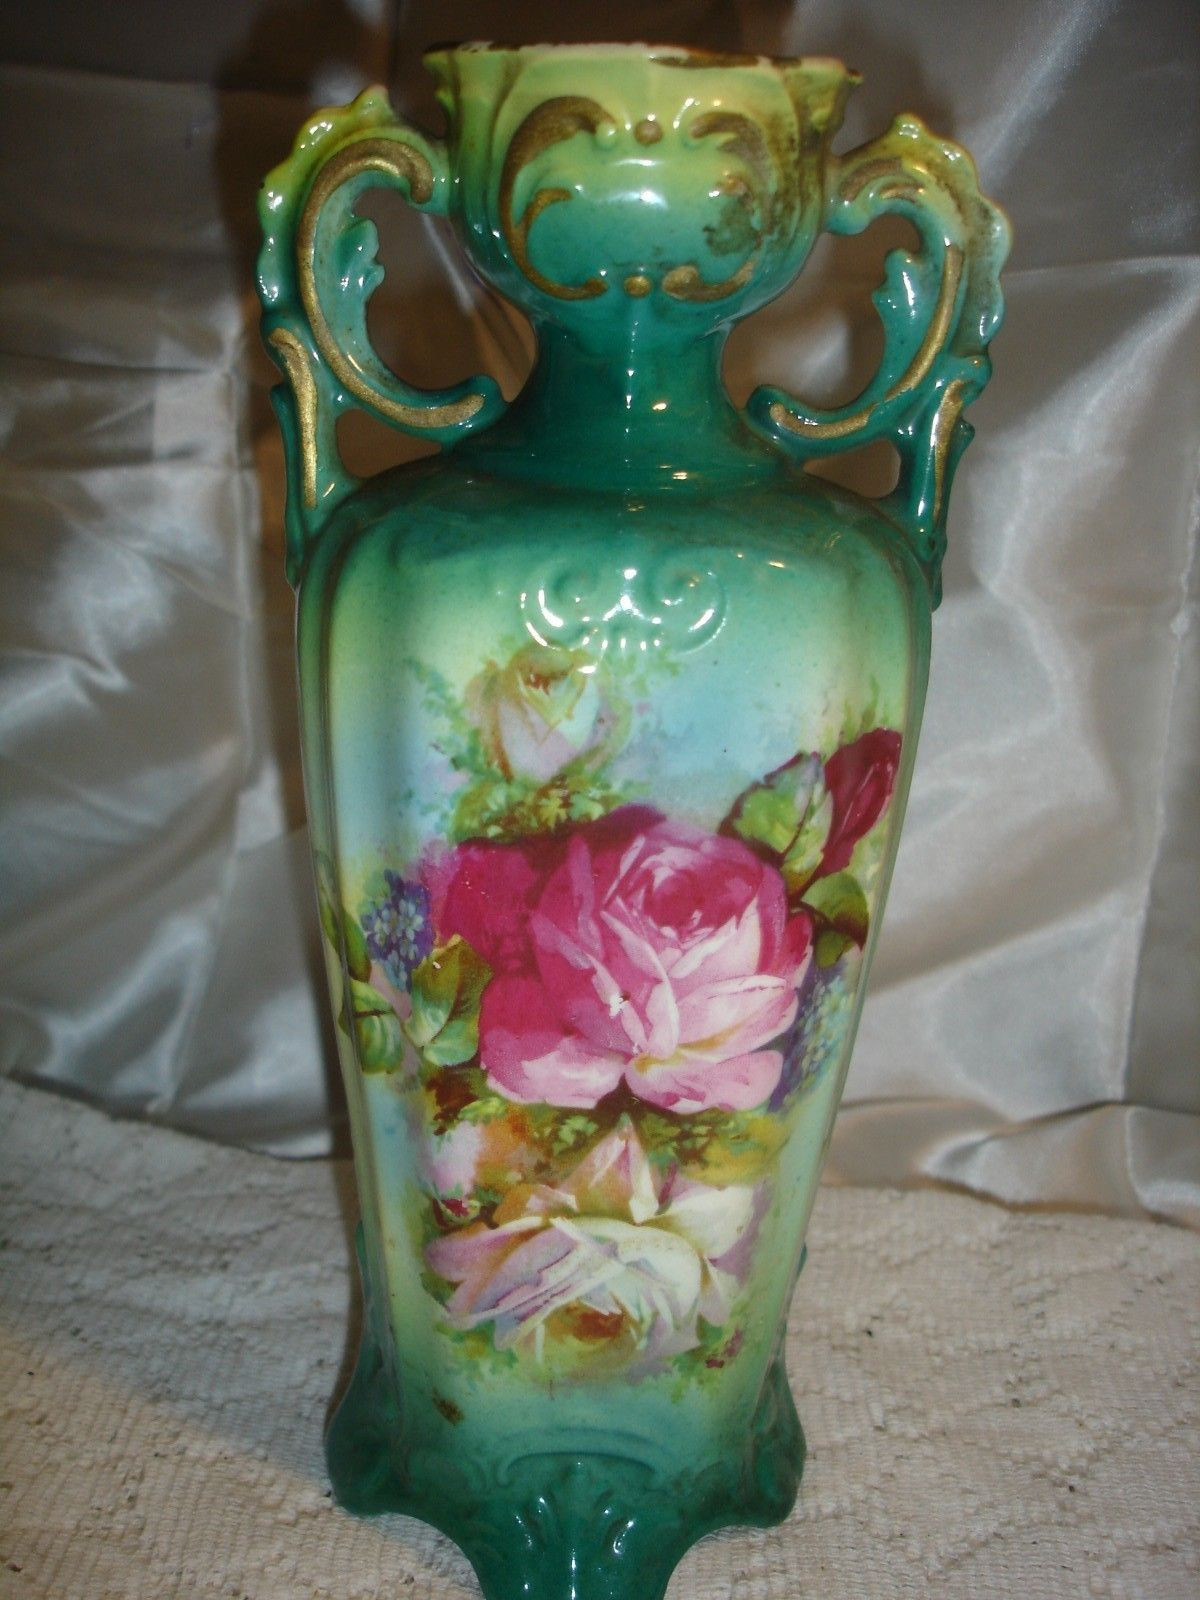 16 Popular Lalique Vases On Ebay 2024 free download lalique vases on ebay of vintage antique czechoslovakia hand painted roses porcelain vase with vintage antique czechoslovakia hand painted roses porcelain vase ebay porcelain vase painted ro